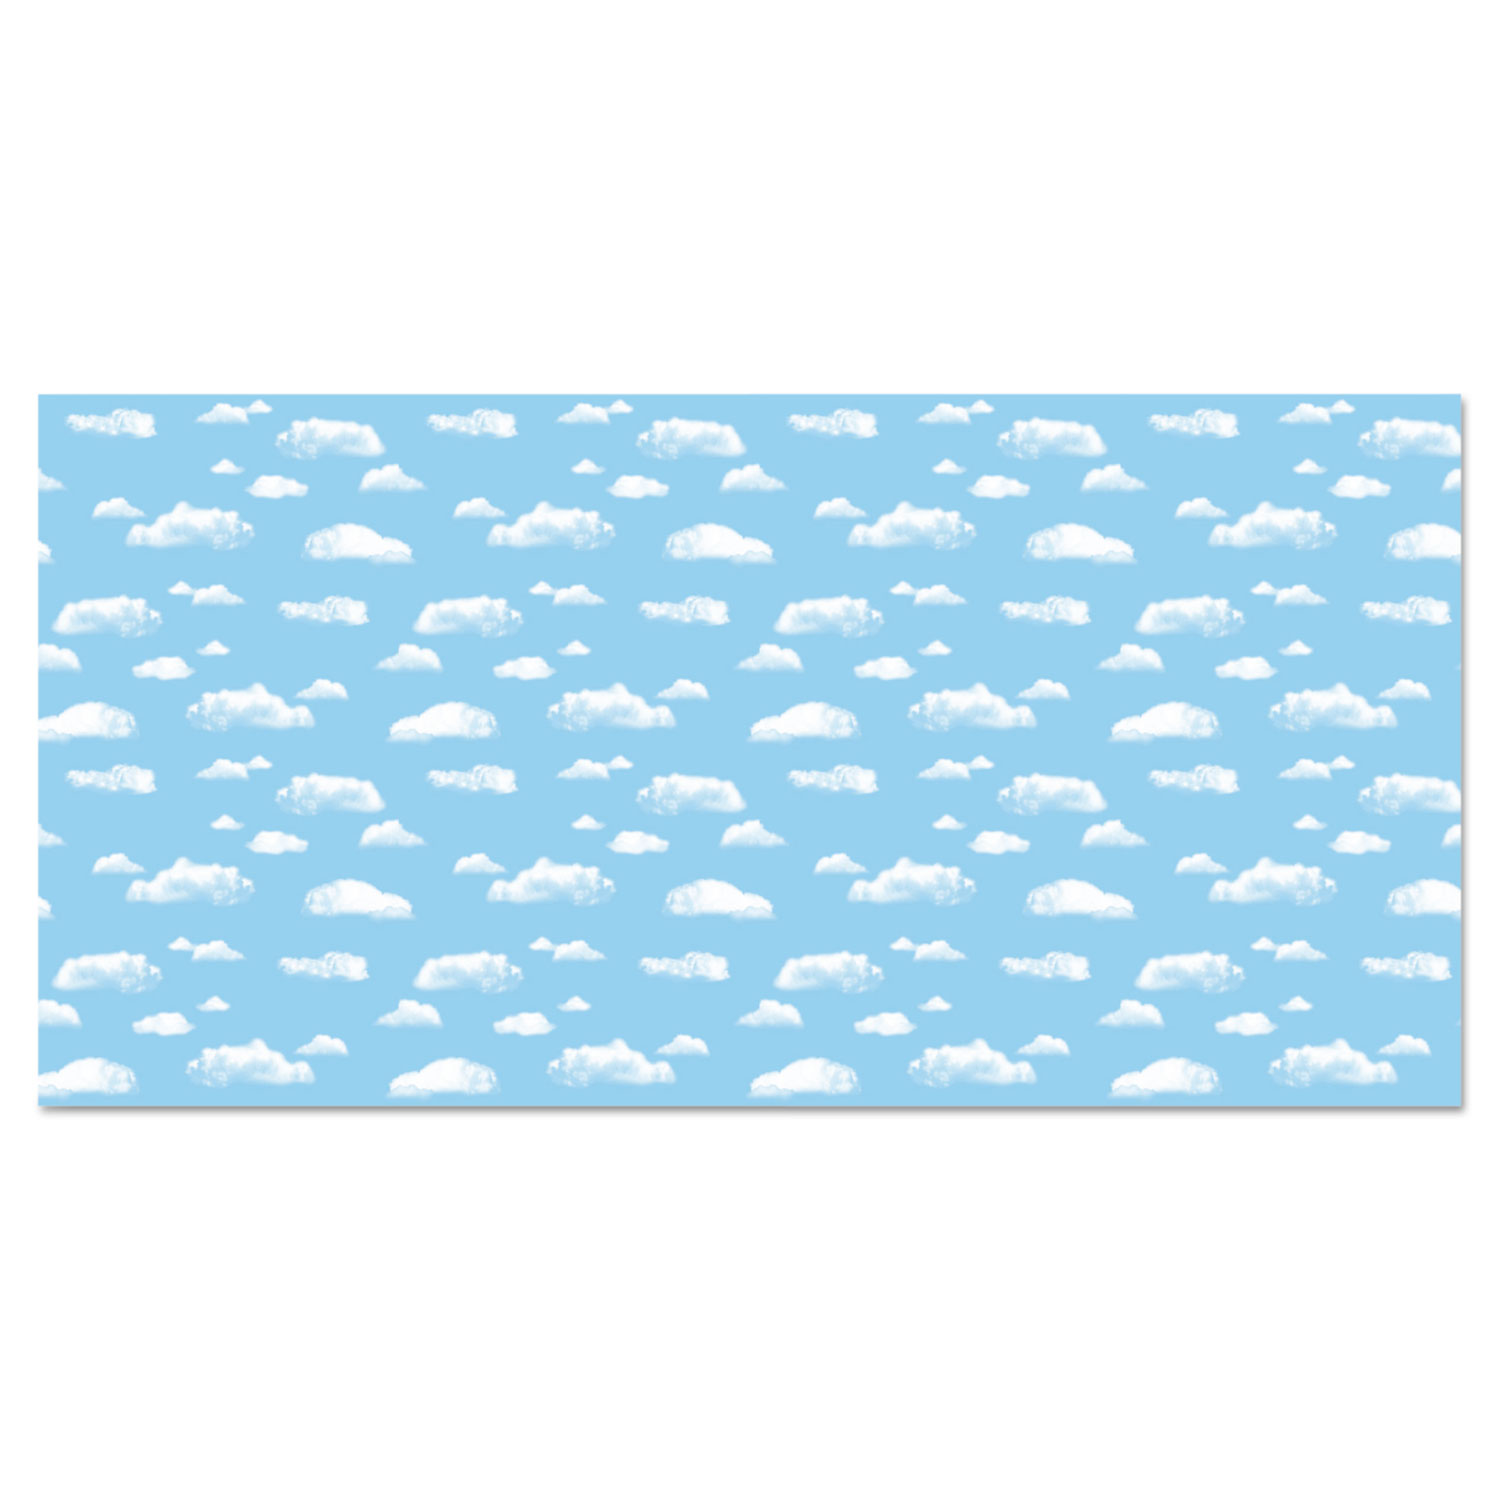  Pacon 56465 Fadeless Designs Bulletin Board Paper, Clouds, 48 x 50 ft. (PAC56465) 